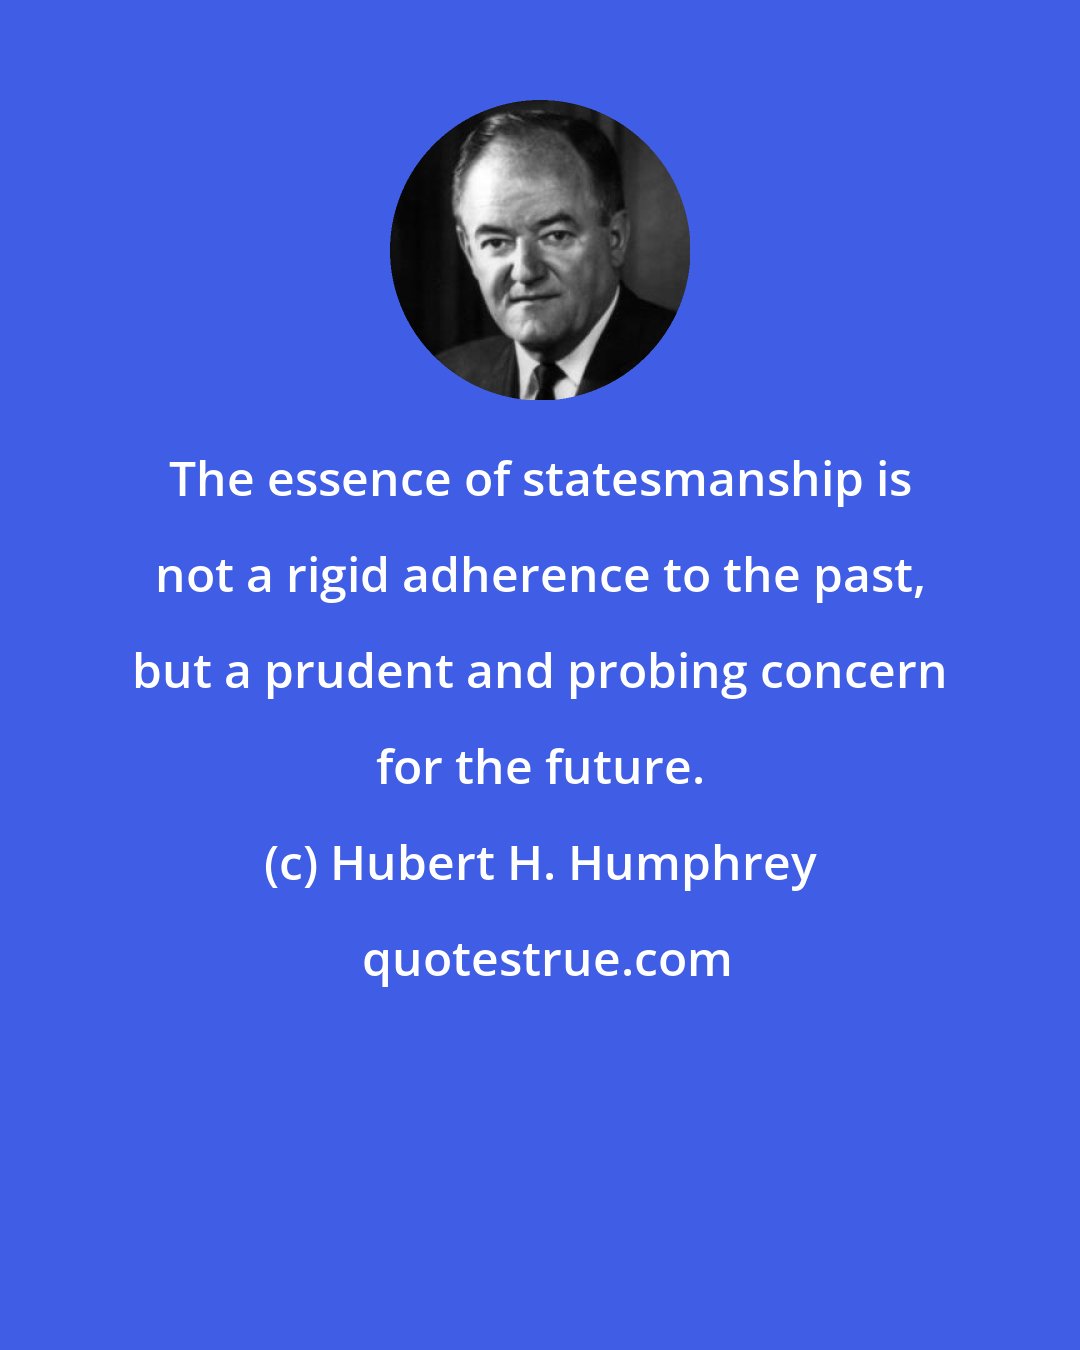 Hubert H. Humphrey: The essence of statesmanship is not a rigid adherence to the past, but a prudent and probing concern for the future.